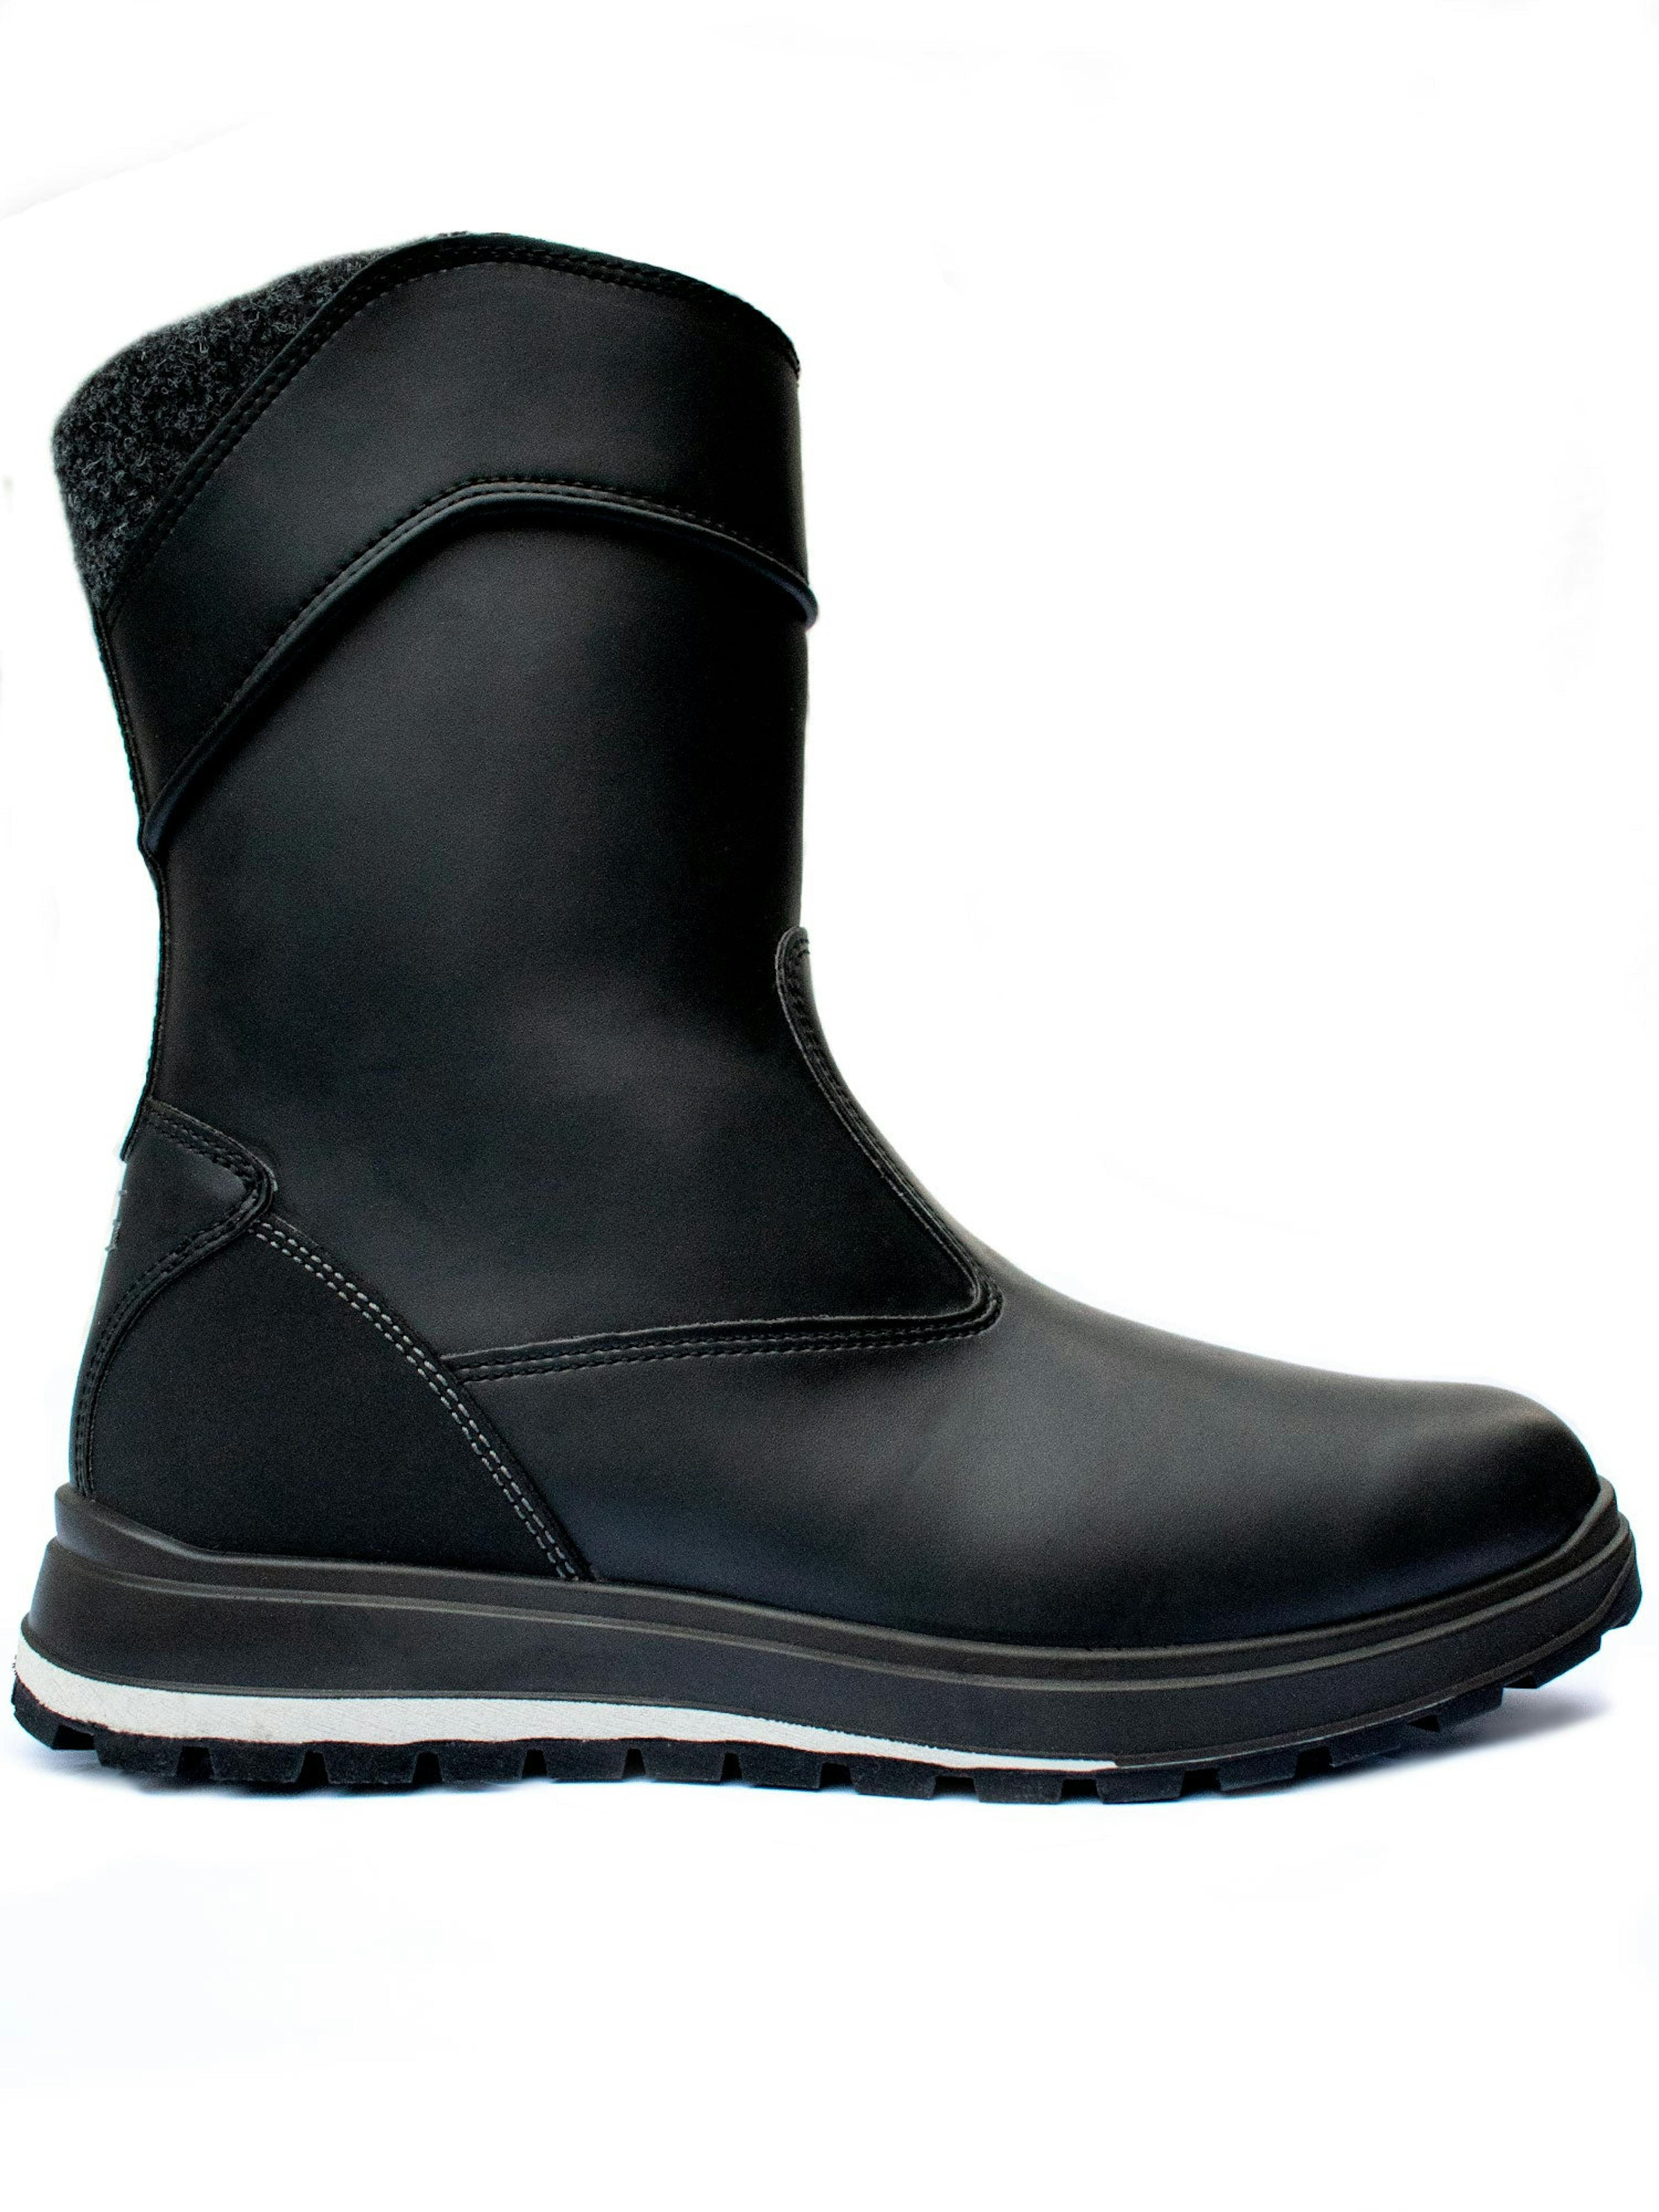 WVSport Men's Insulated Country Boots | Black